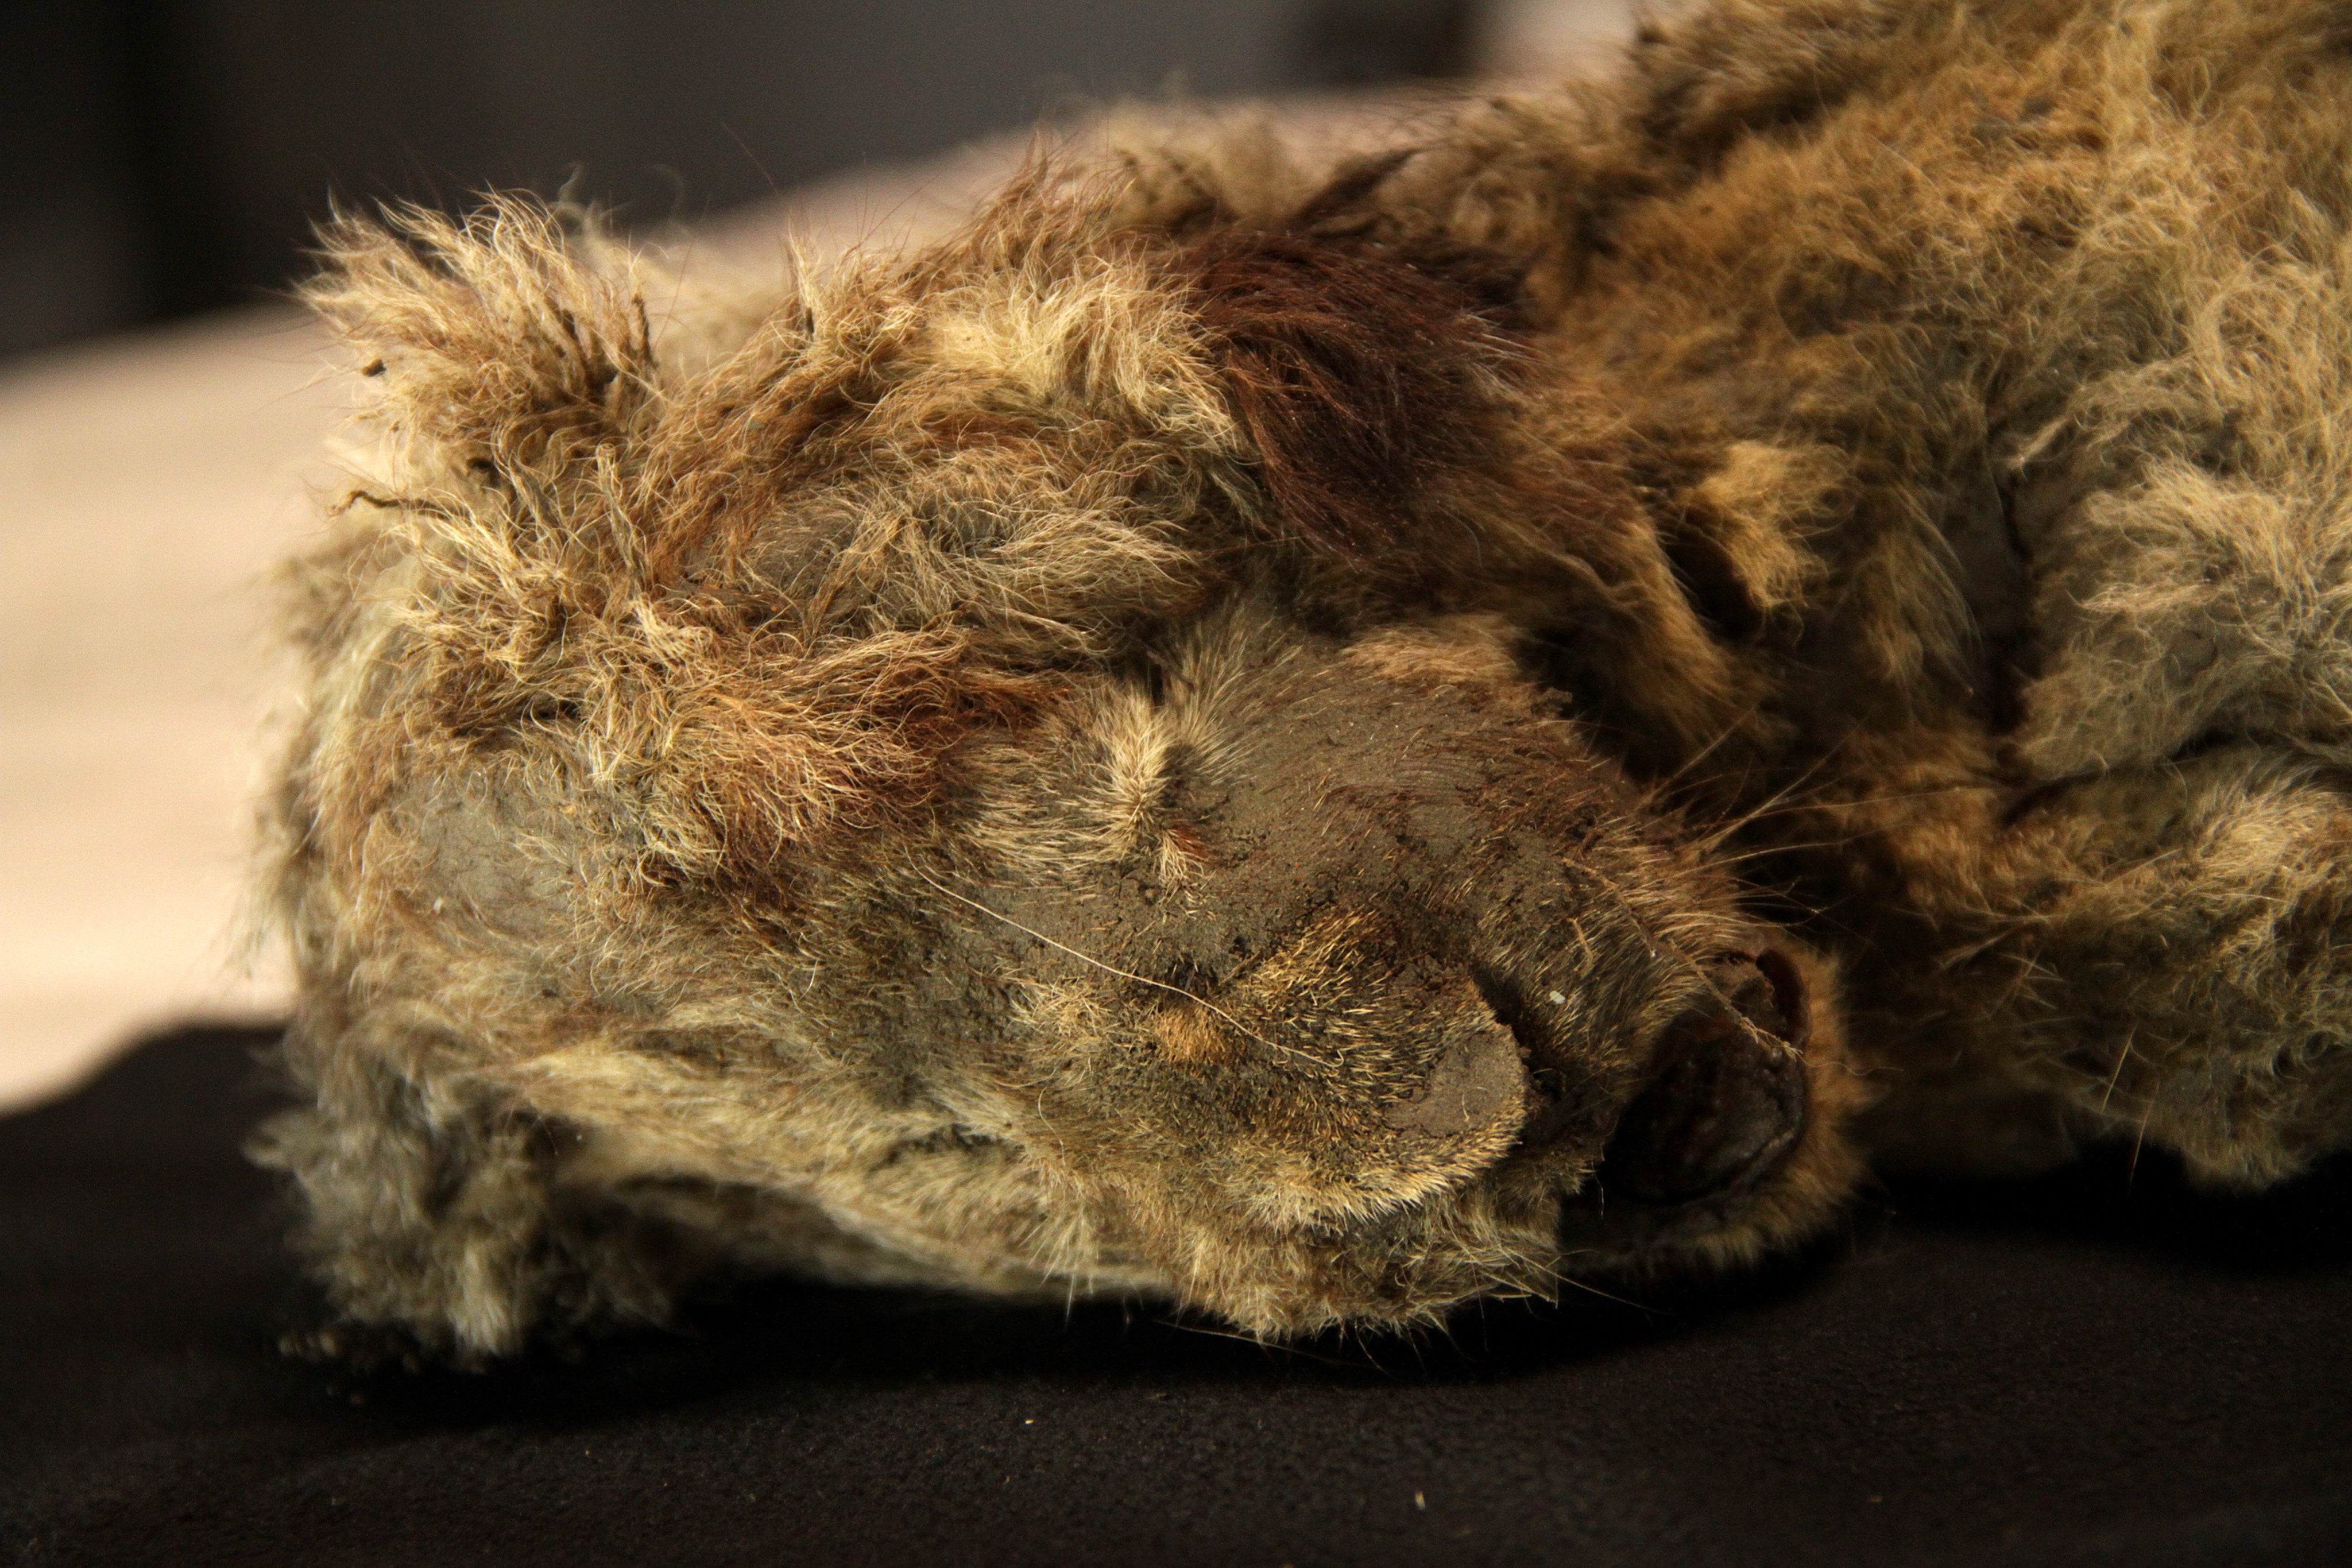 Sparta, the 27,962-year-old lion cub thought to be the best-preserved Ice Age animal ever found